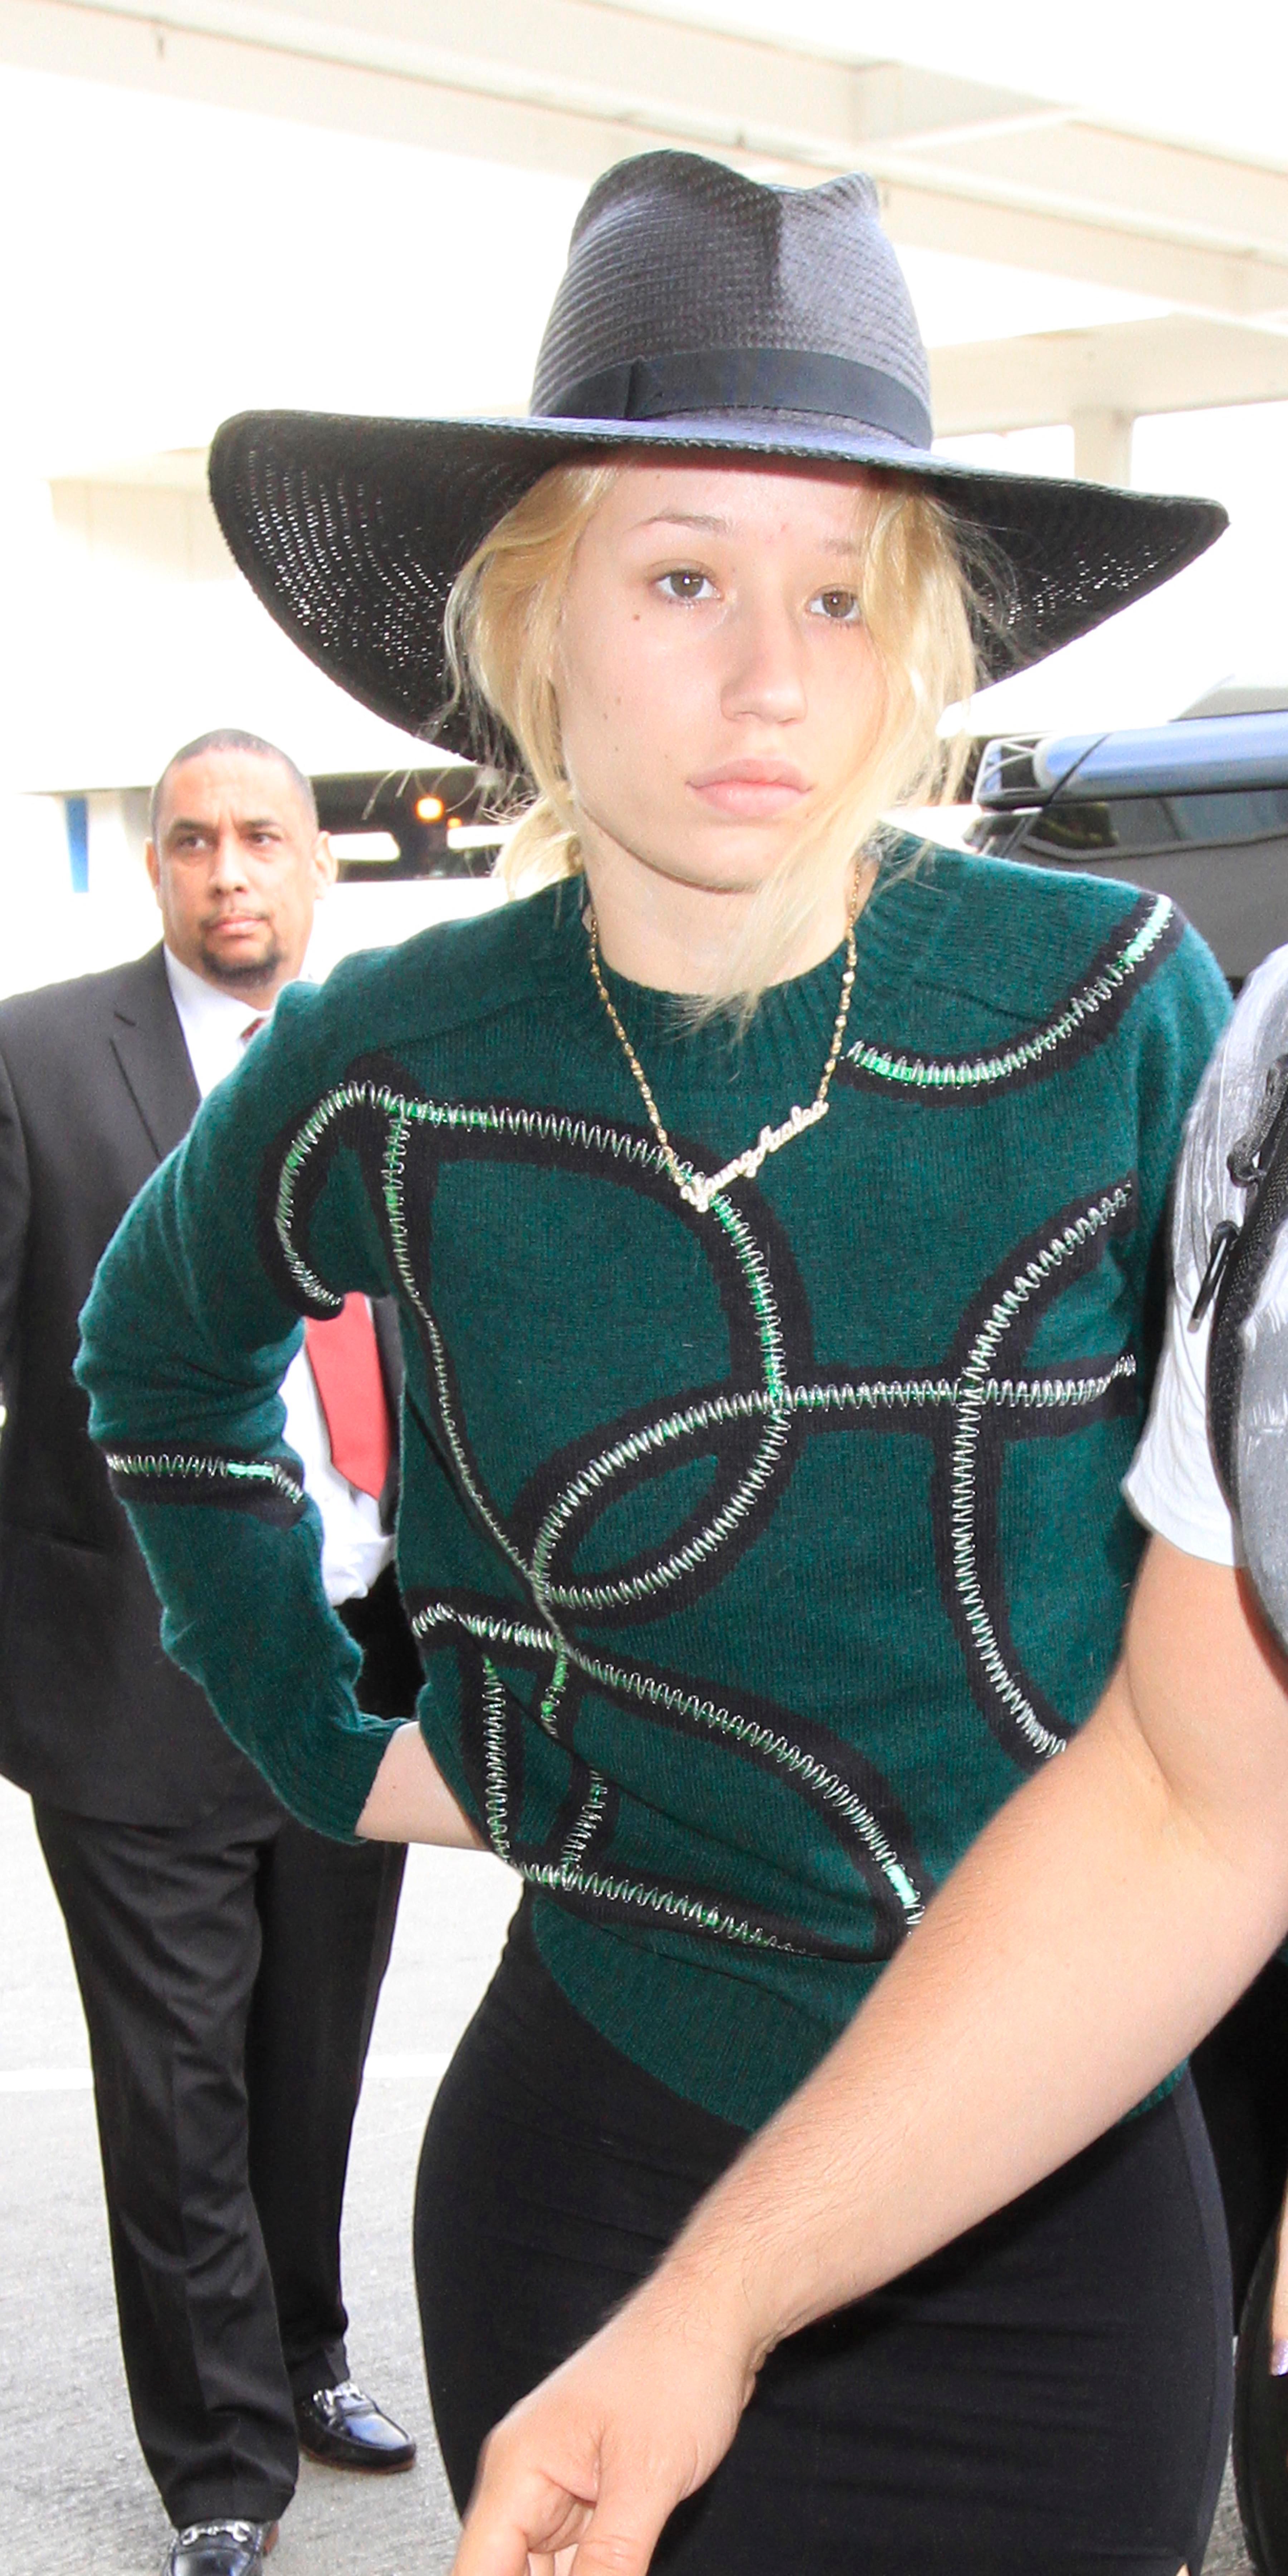 skuffet Orator Pengeudlån Not So Fancy! Make Up Free Iggy Azalea At LAX—See The Photos!